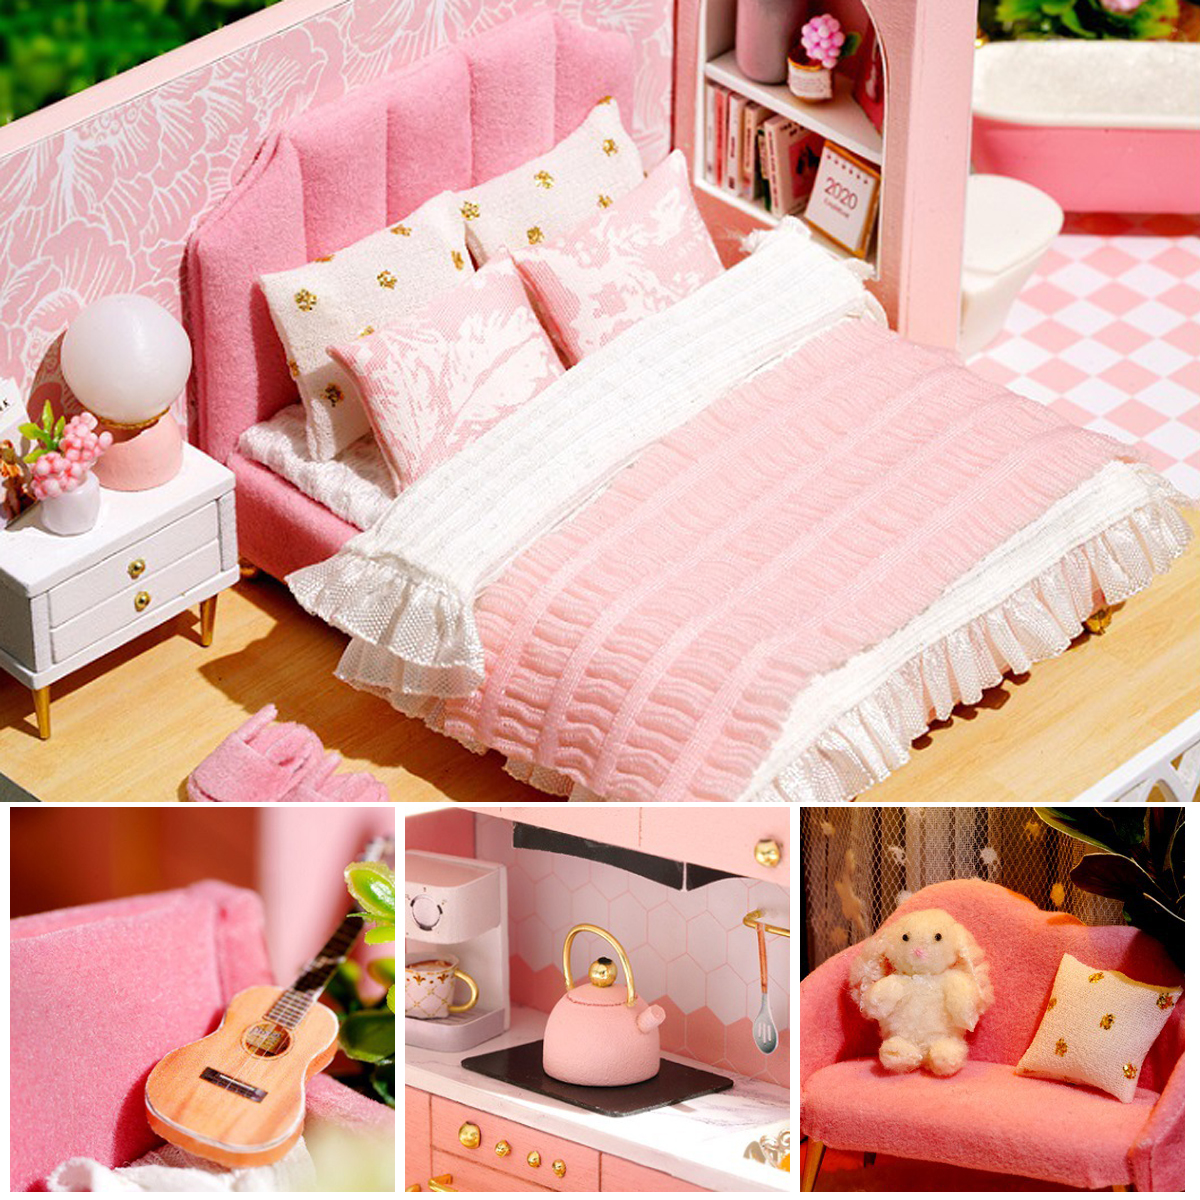 124-Wooden-3D-DIY-Handmade-Assemble-Miniature-Doll-House-Kit-Toy-with-Furniture-for-Kids-Gift-Collec-1730578-5